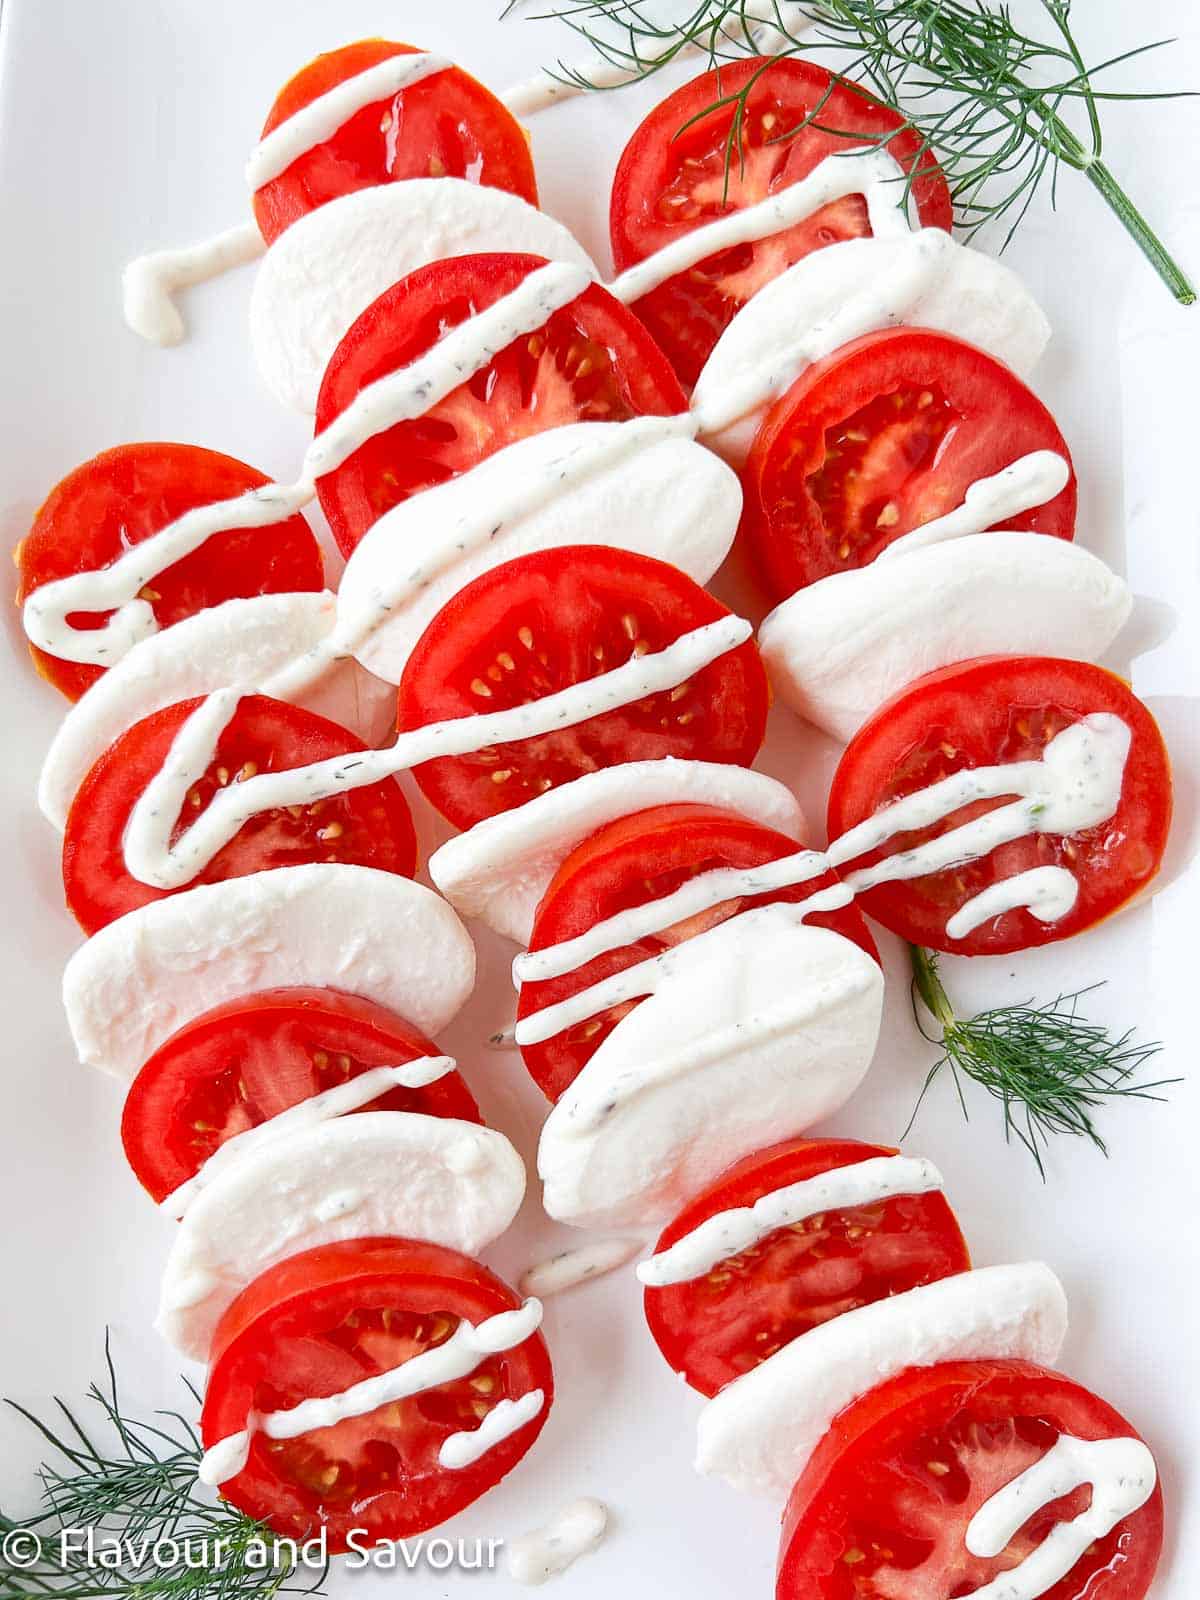 Tomato slices alternating with fresh mozzarella slices (bocconcini medallions) drizzled with dill dressing.